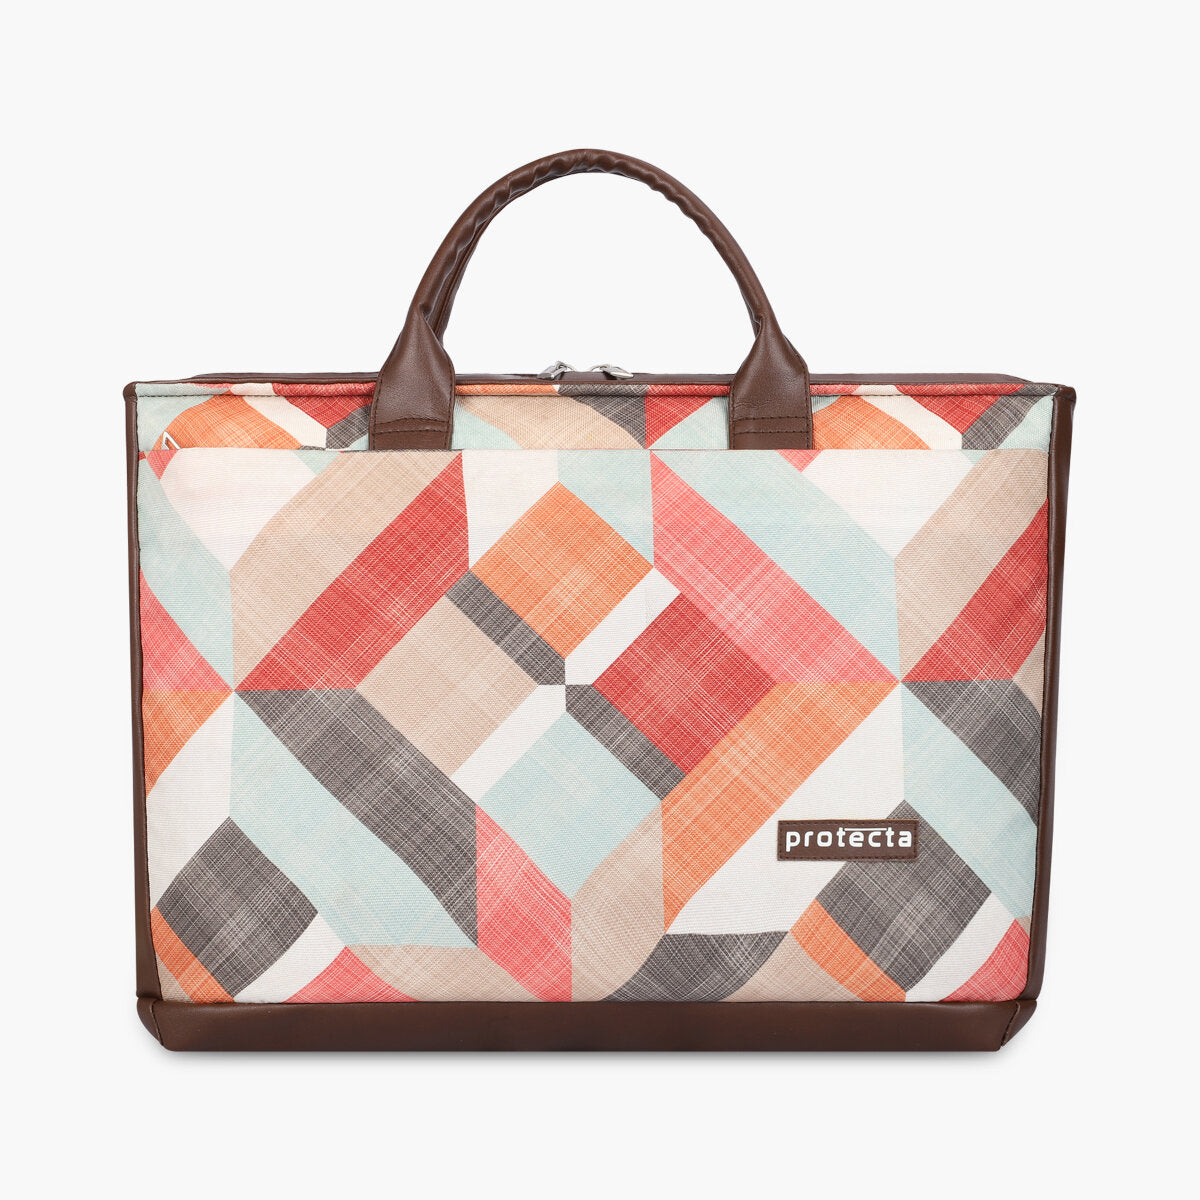 Geometric Print | Protecta Evenly Poised Office Laptop Bag for Women - Main